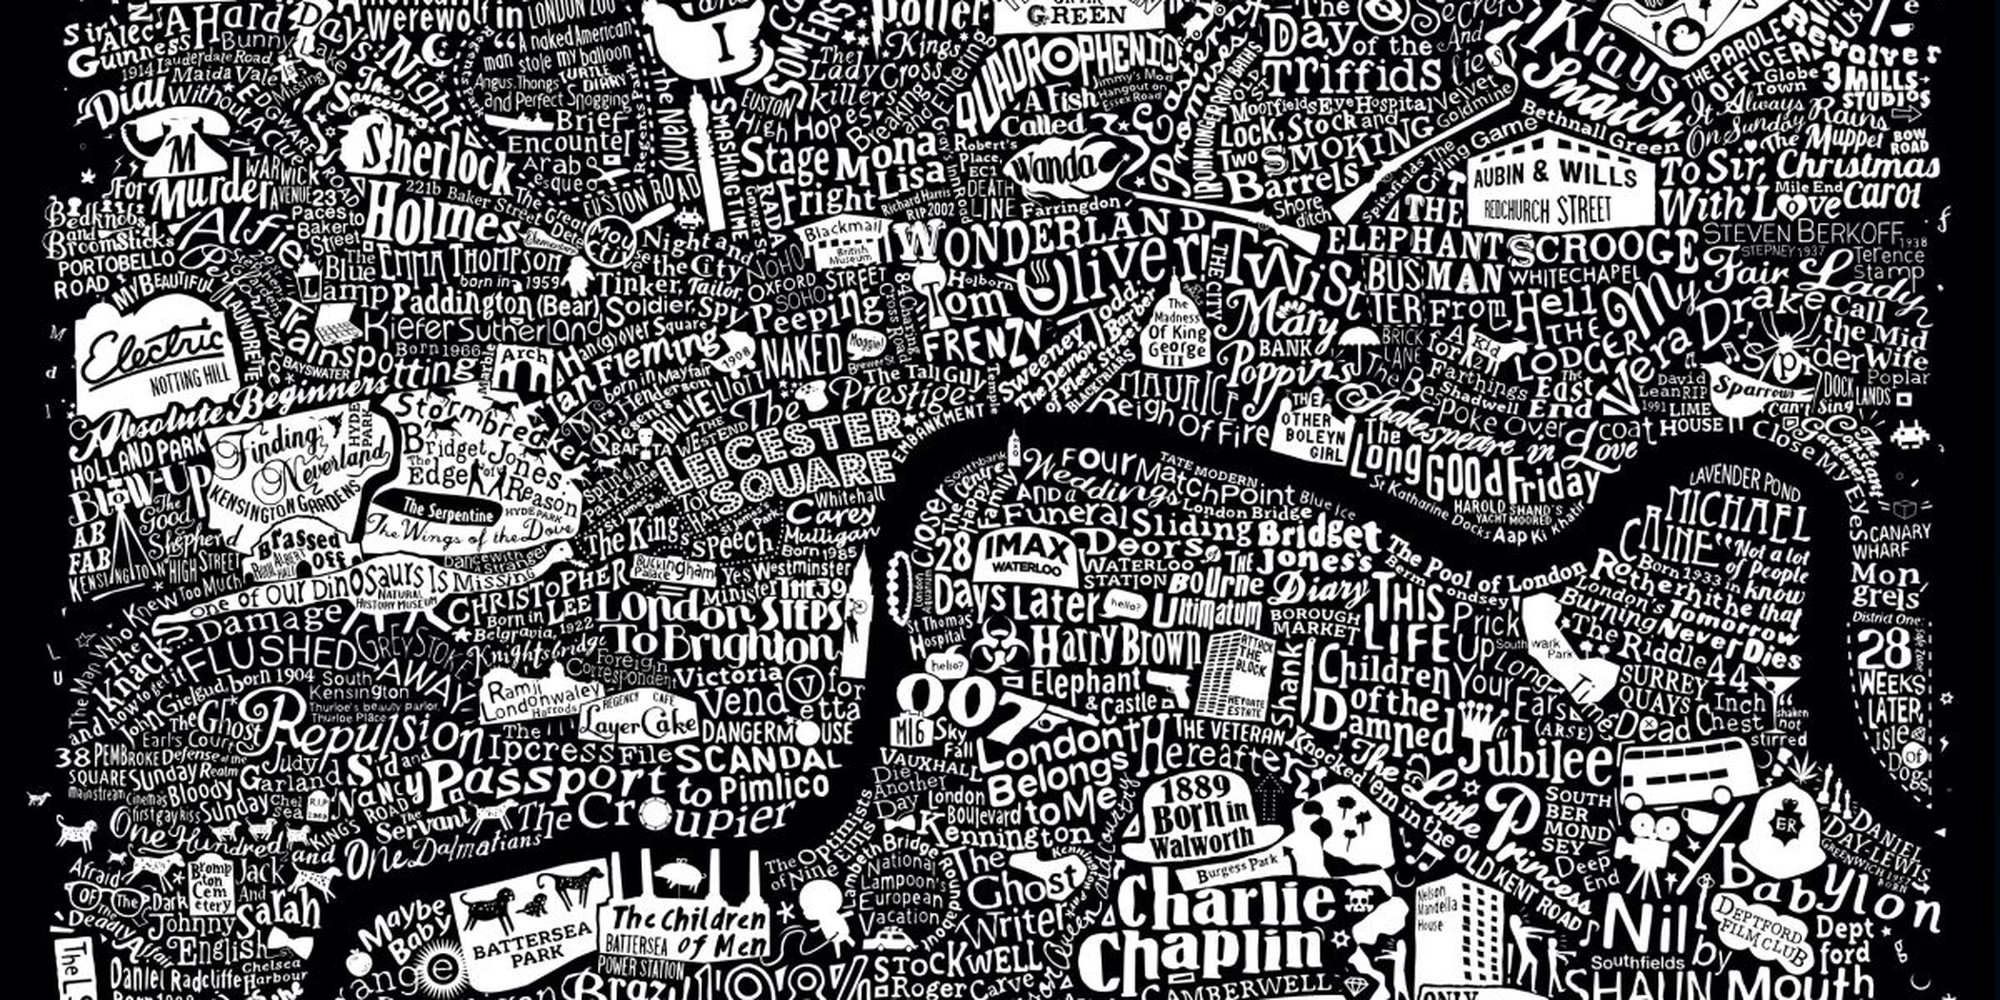 Art of the Day: "Dex, LONDON FILM MAP LARGE (black)" by Dex